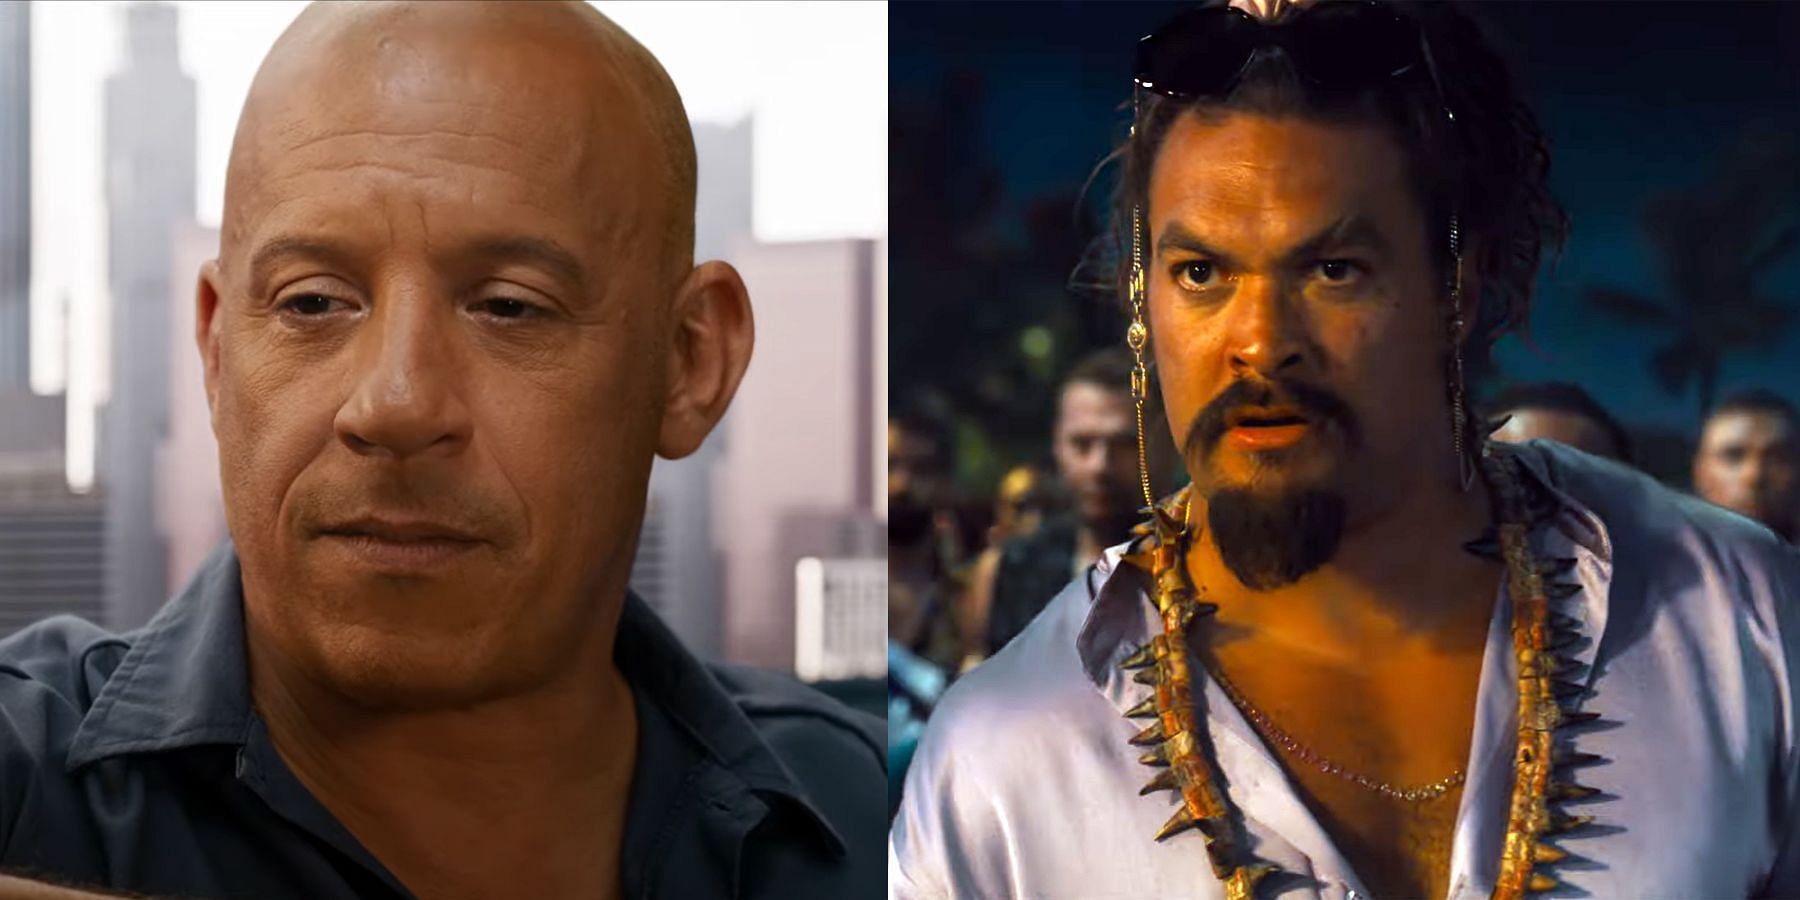 Vin Diesel announces Fast and Furious 11 with Jason Momoa returning after Fast X (Image via Universal)